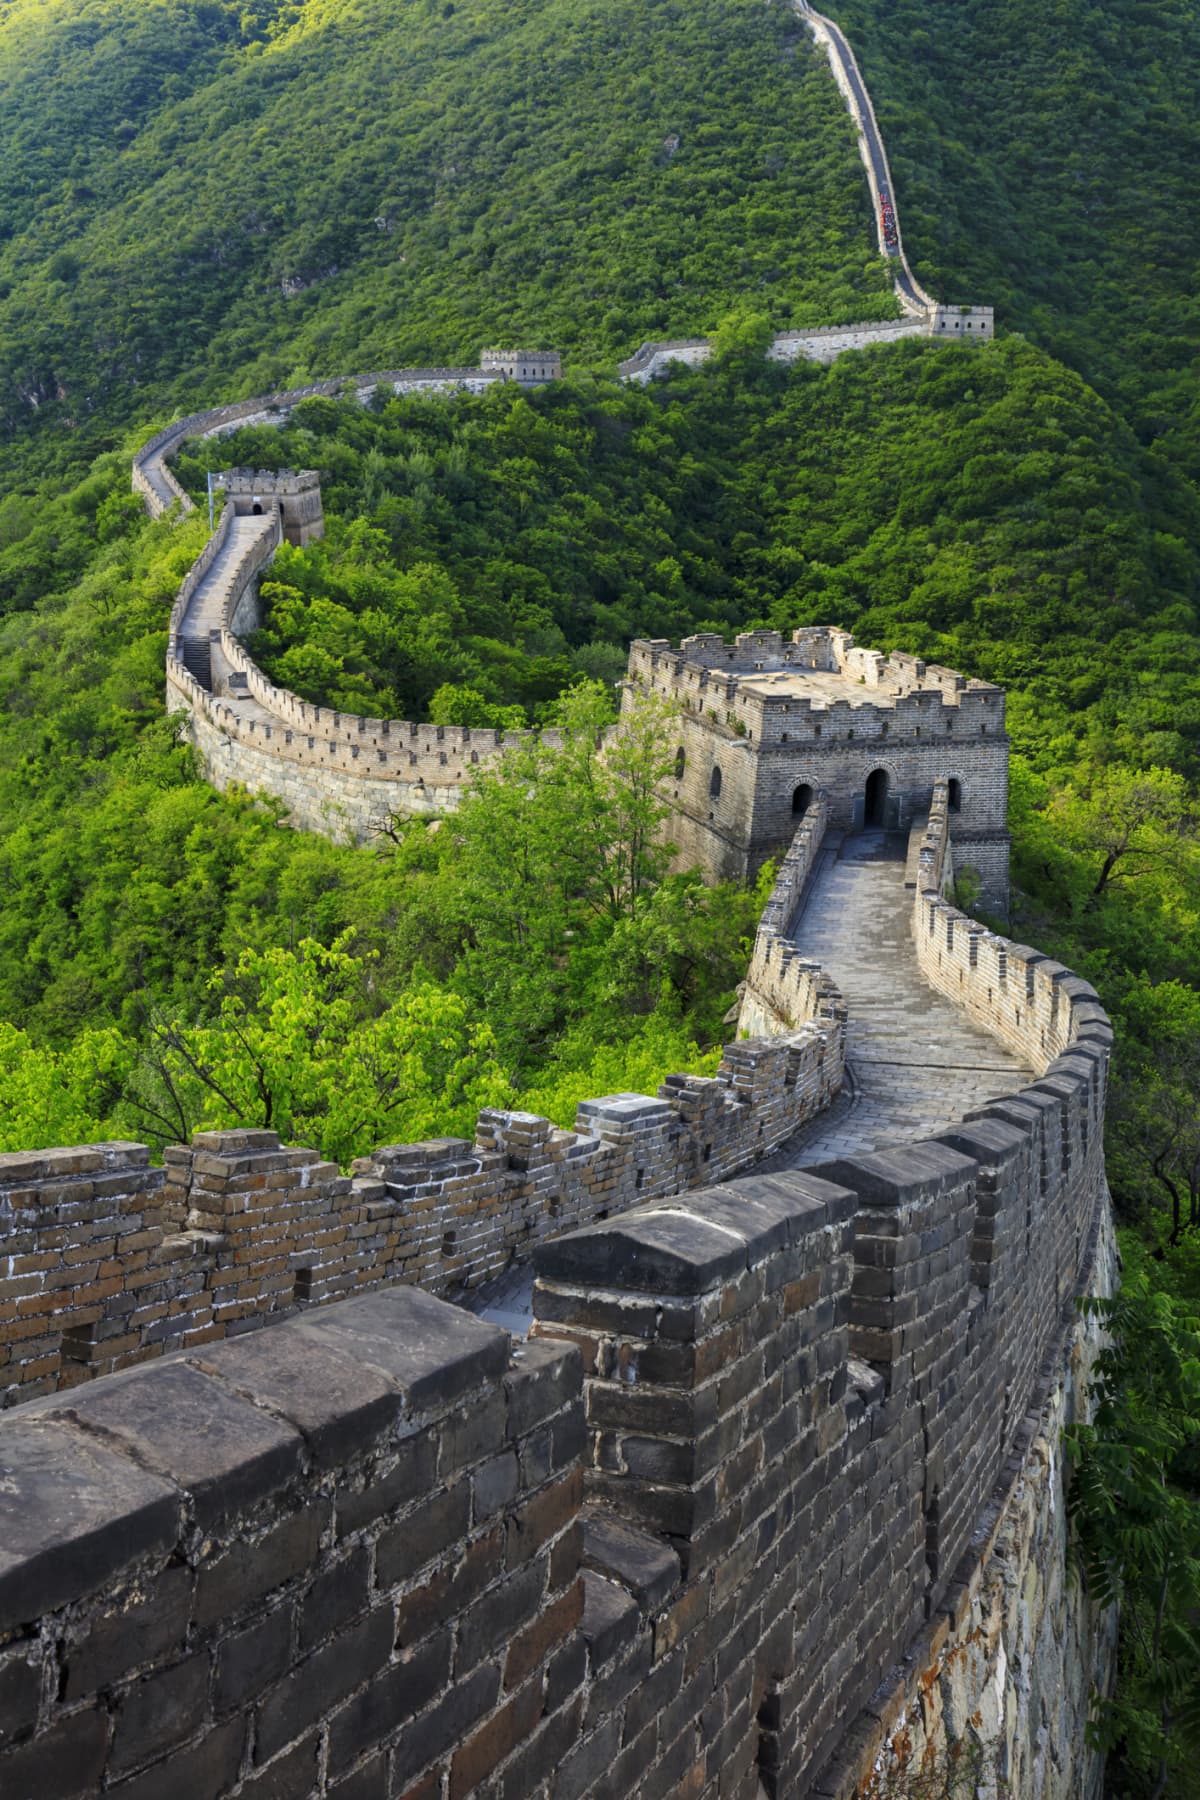 A small portion of The Great Wall of China